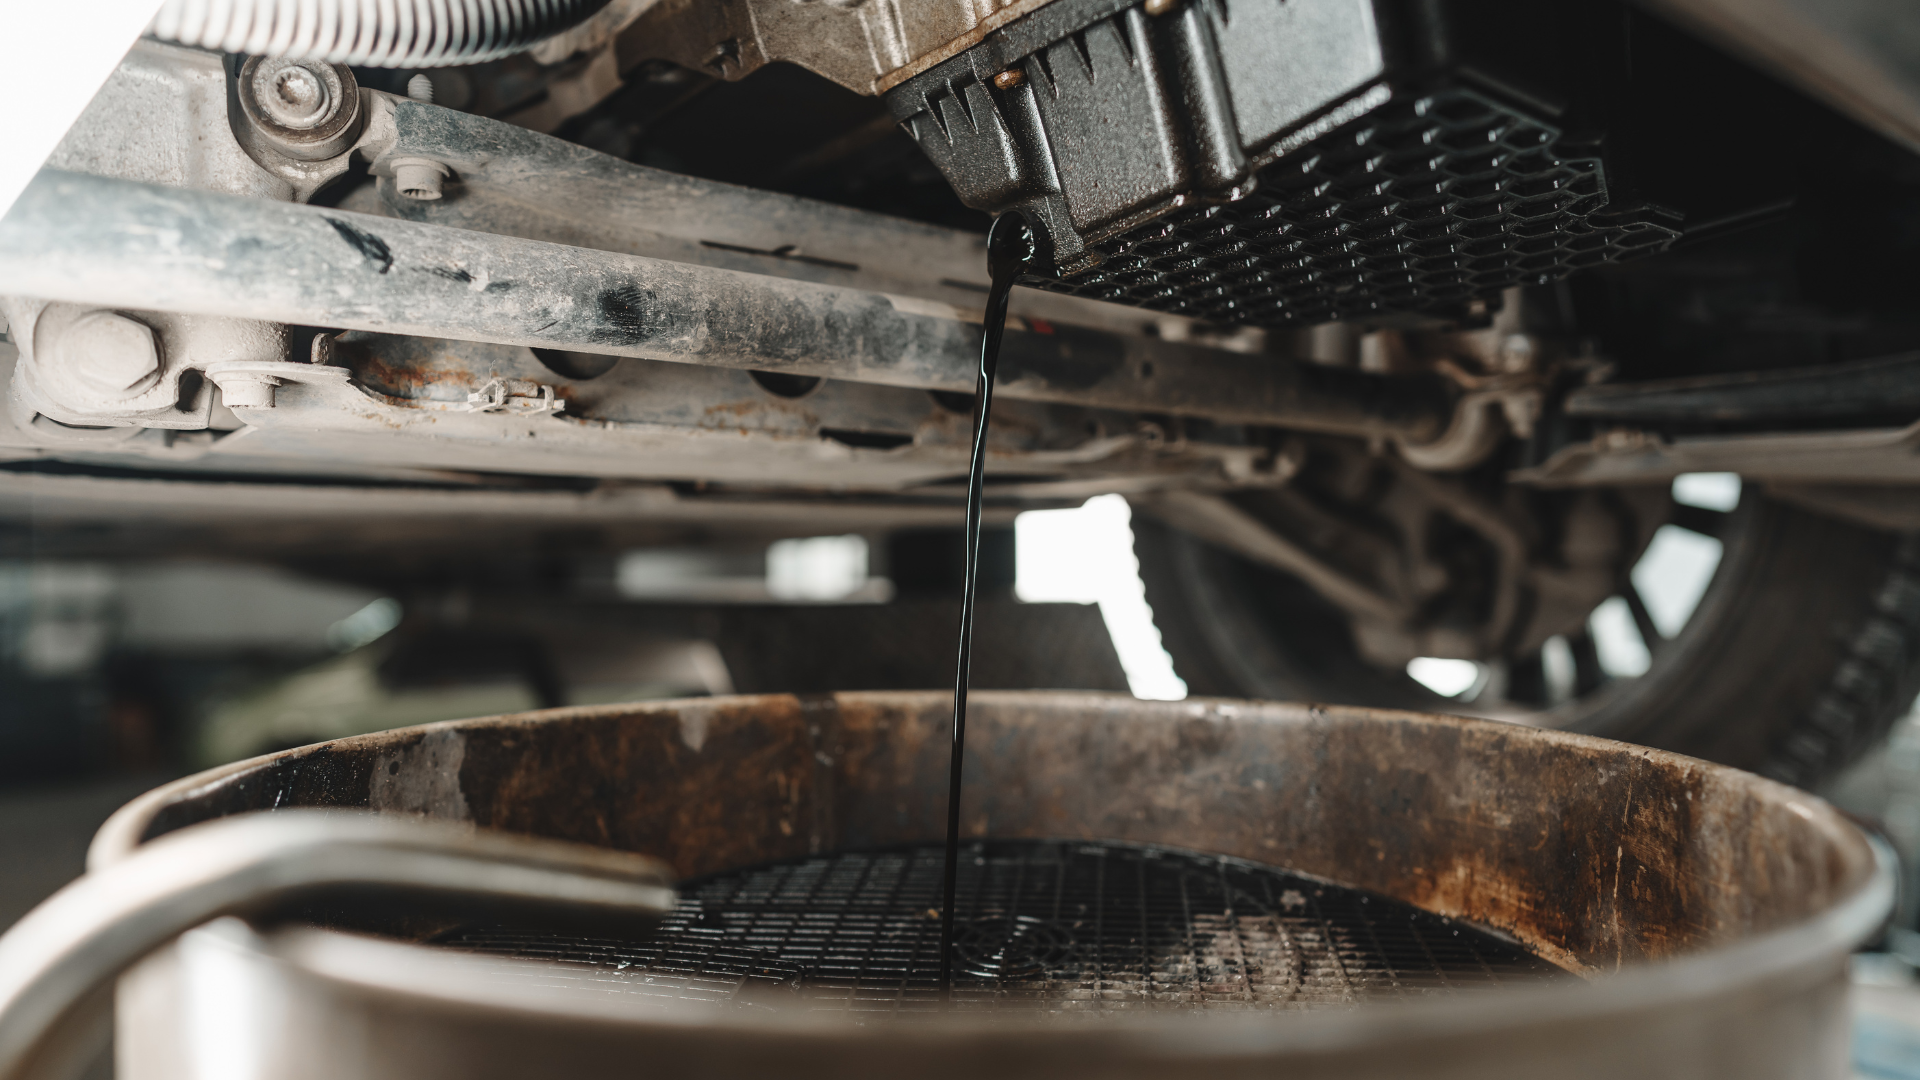 Debunking Oil Change Myths: Separating Fact from Fiction